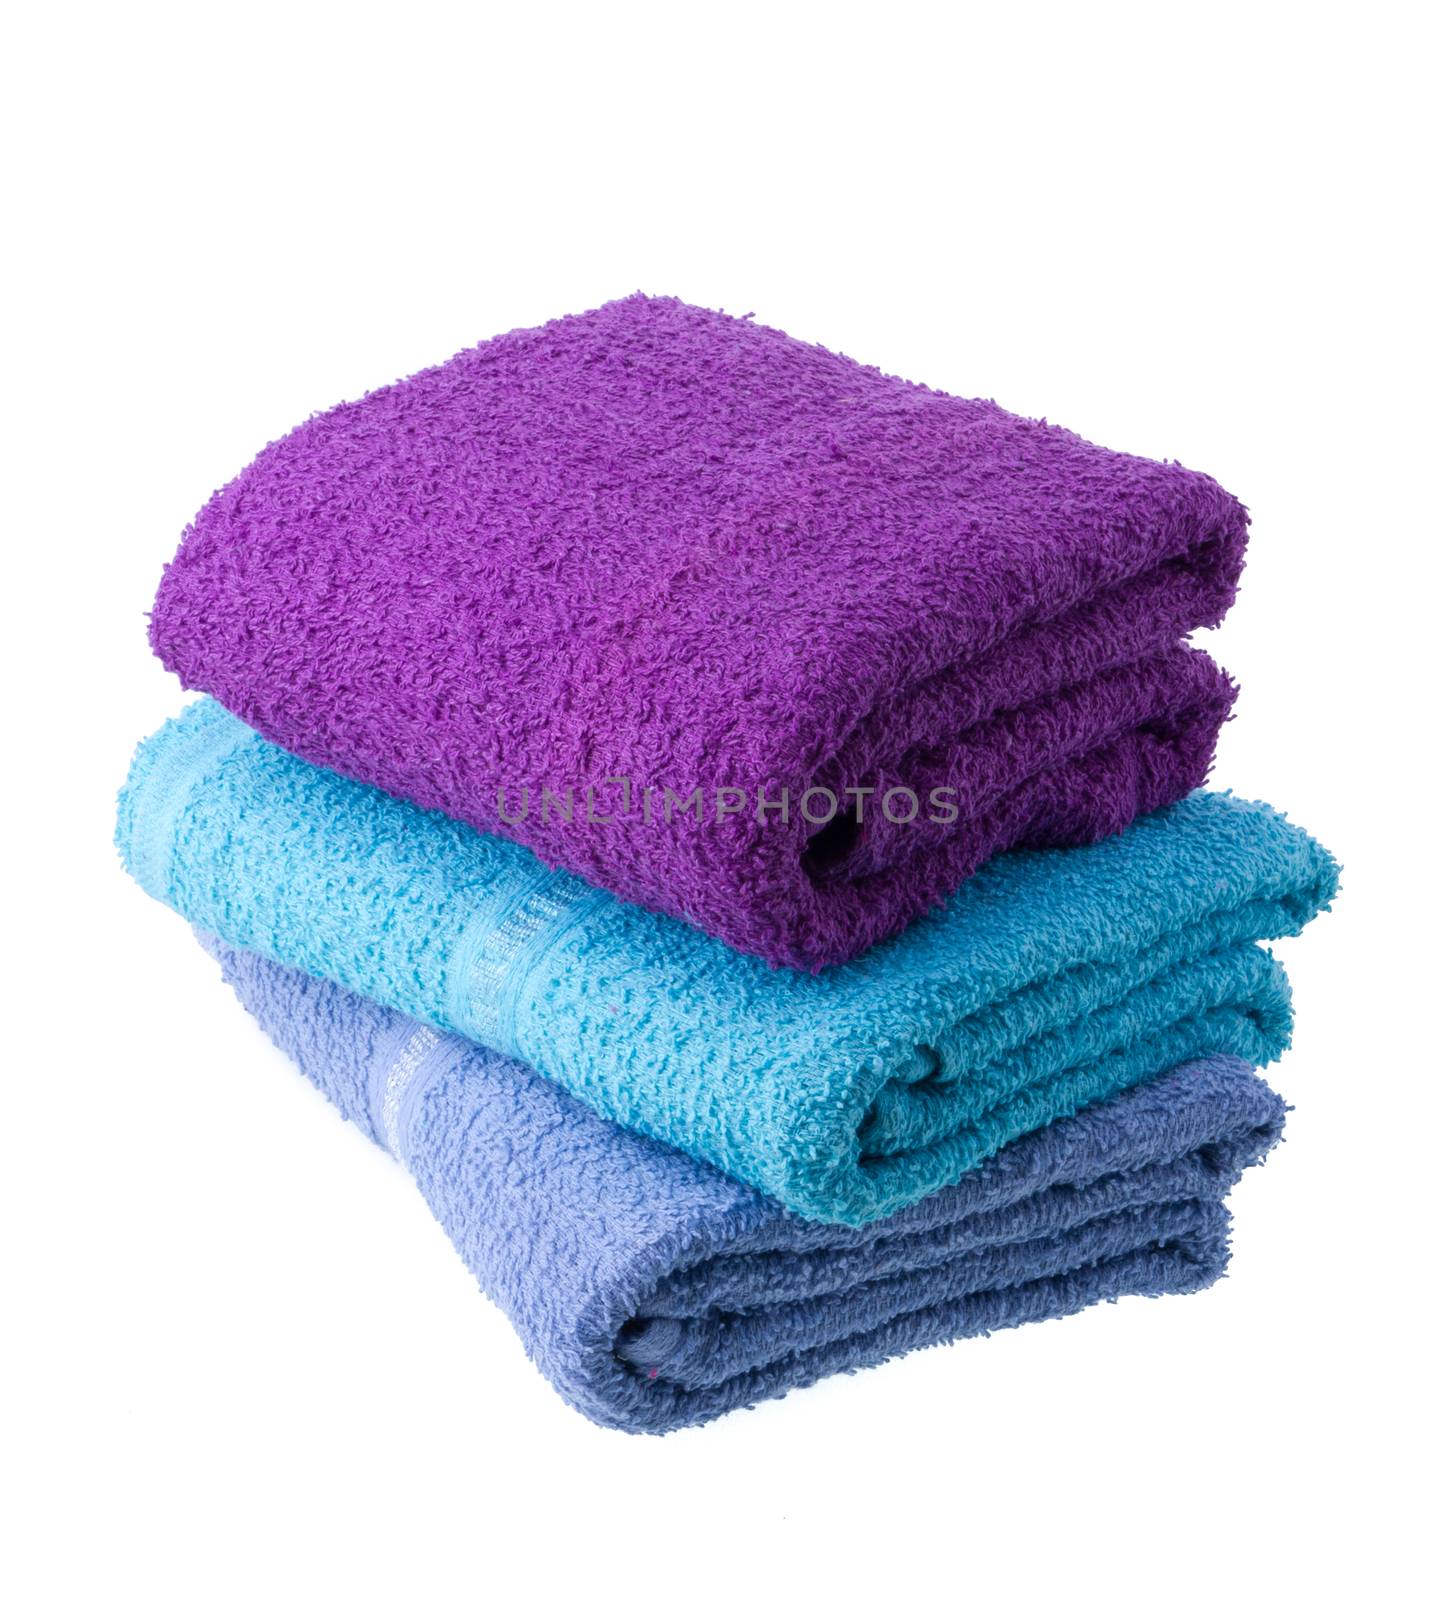 Colorful towels by tehcheesiong